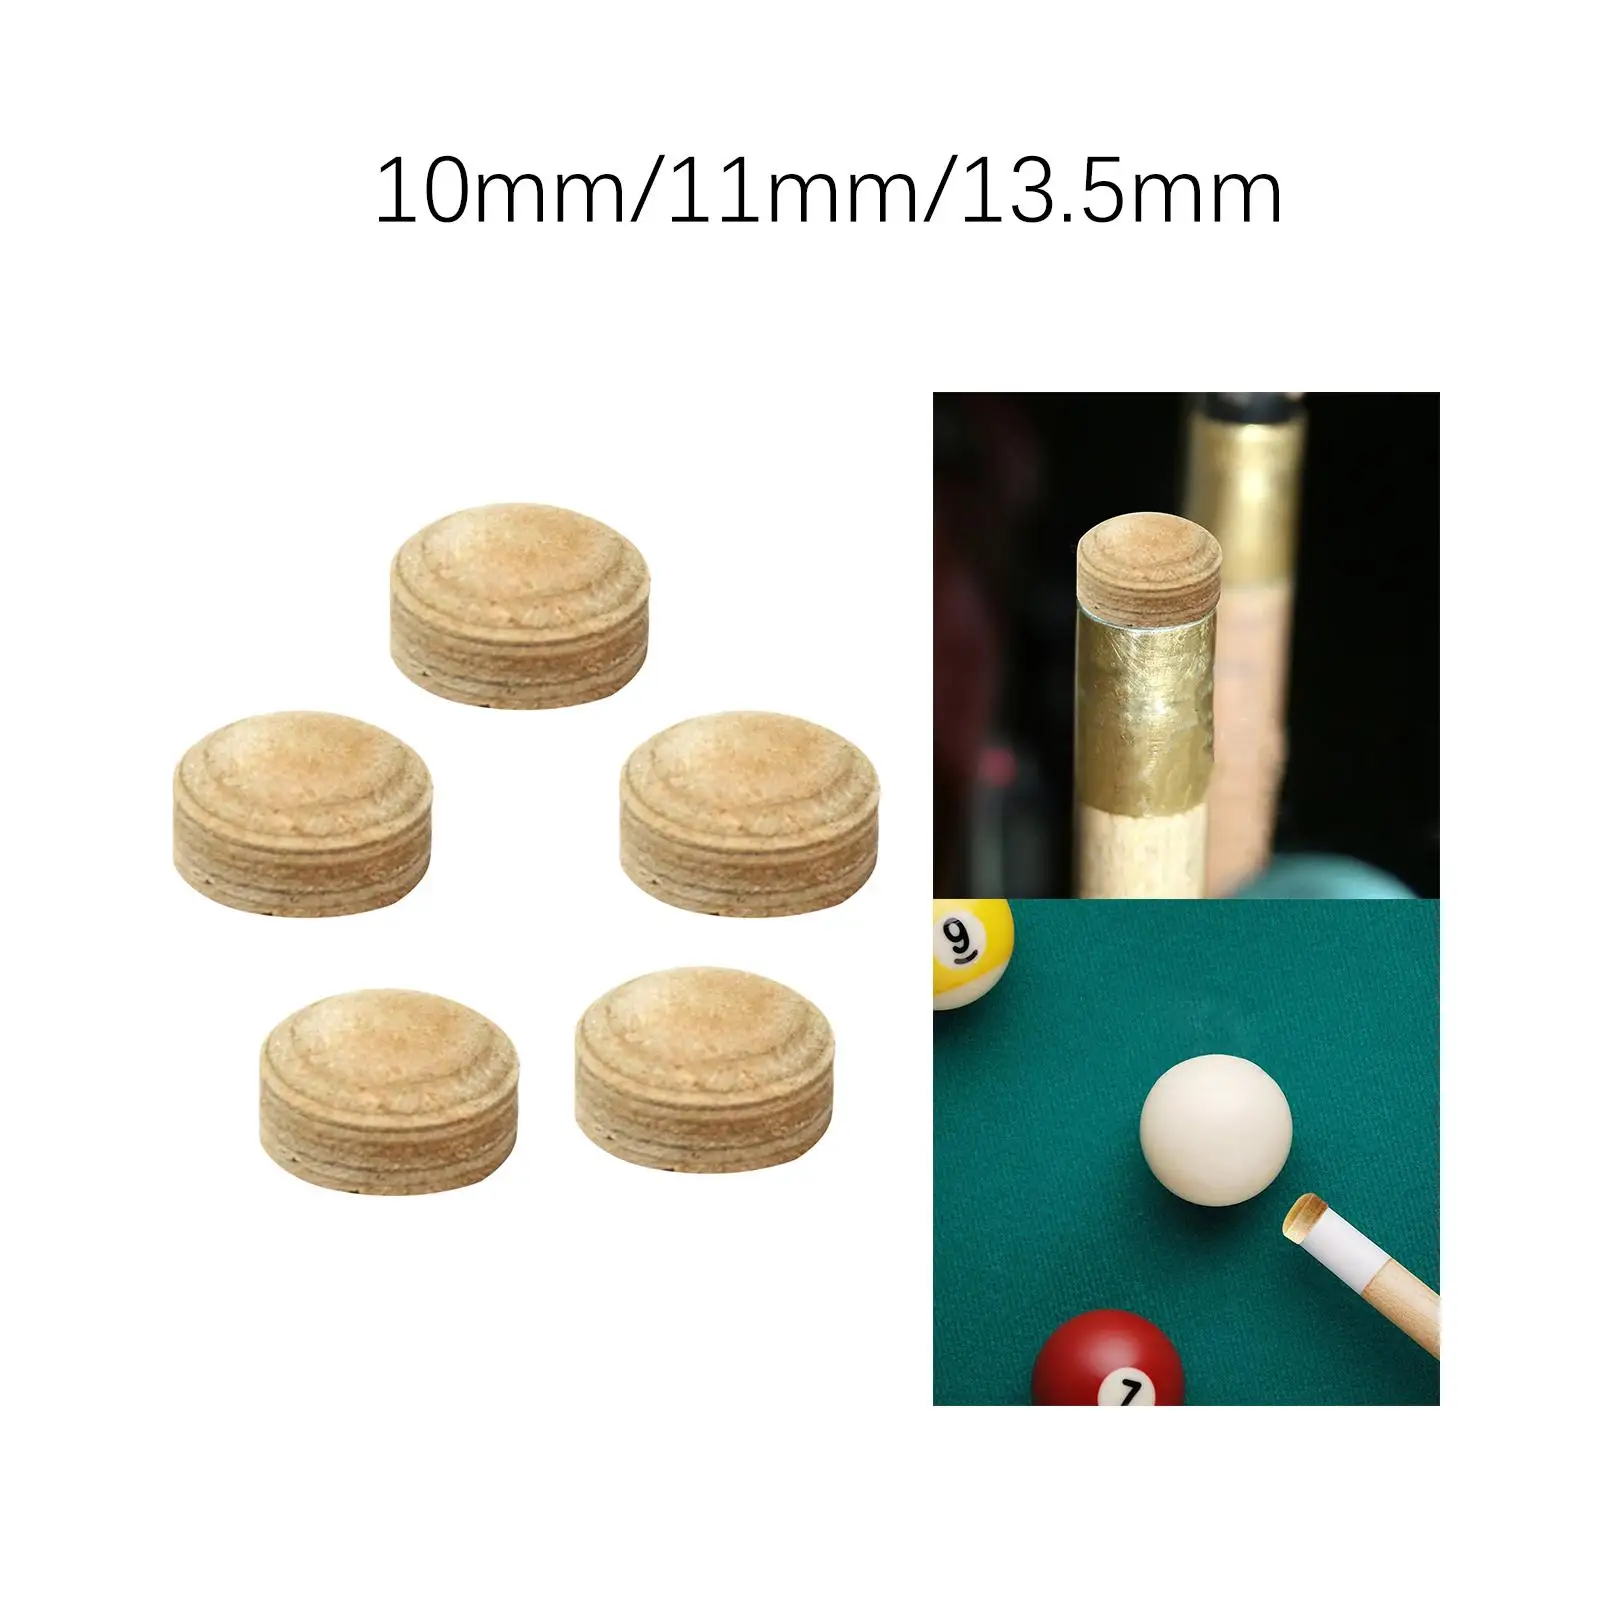 5Pcs Table Billiards Pool Cue Tips Billiard Game Artificial Leather Pool Cue Tips Repair Kit for Personal Use Billiards Room